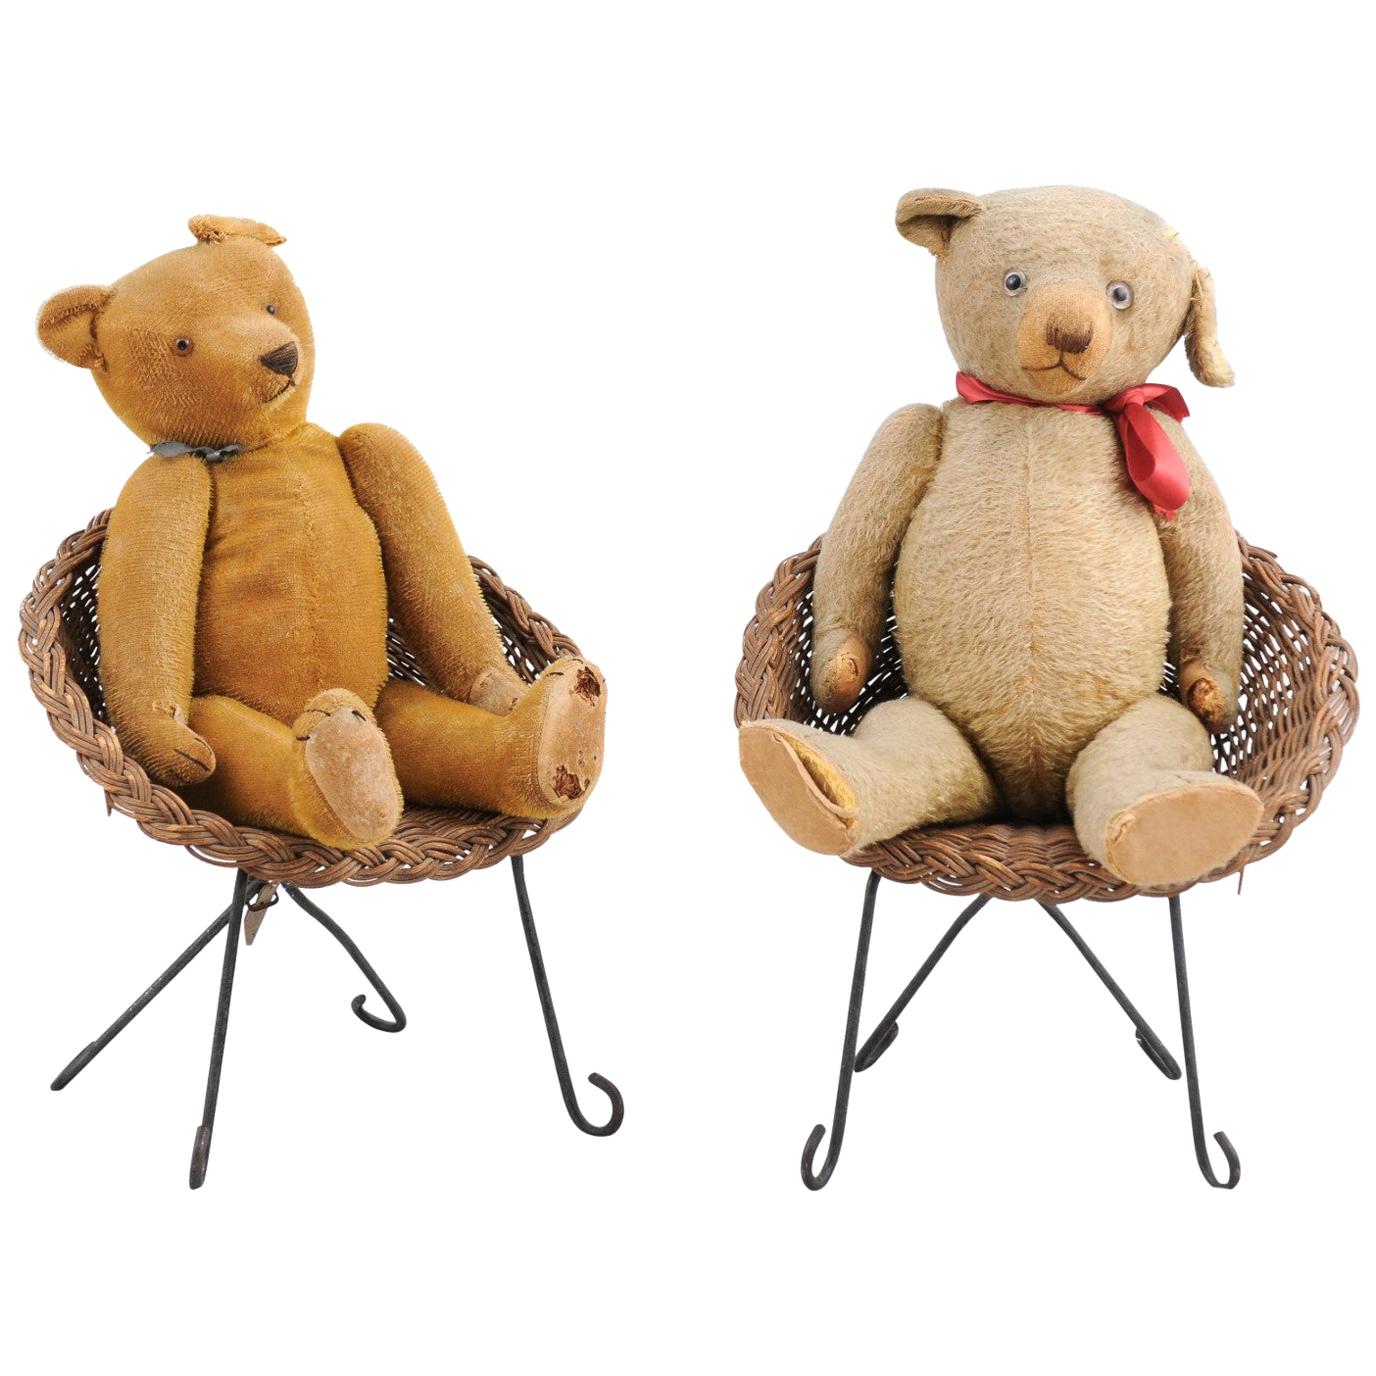 Antique American Teddy Bears with Ribbons Sitting in Wicker Chairs, Priced Each For Sale